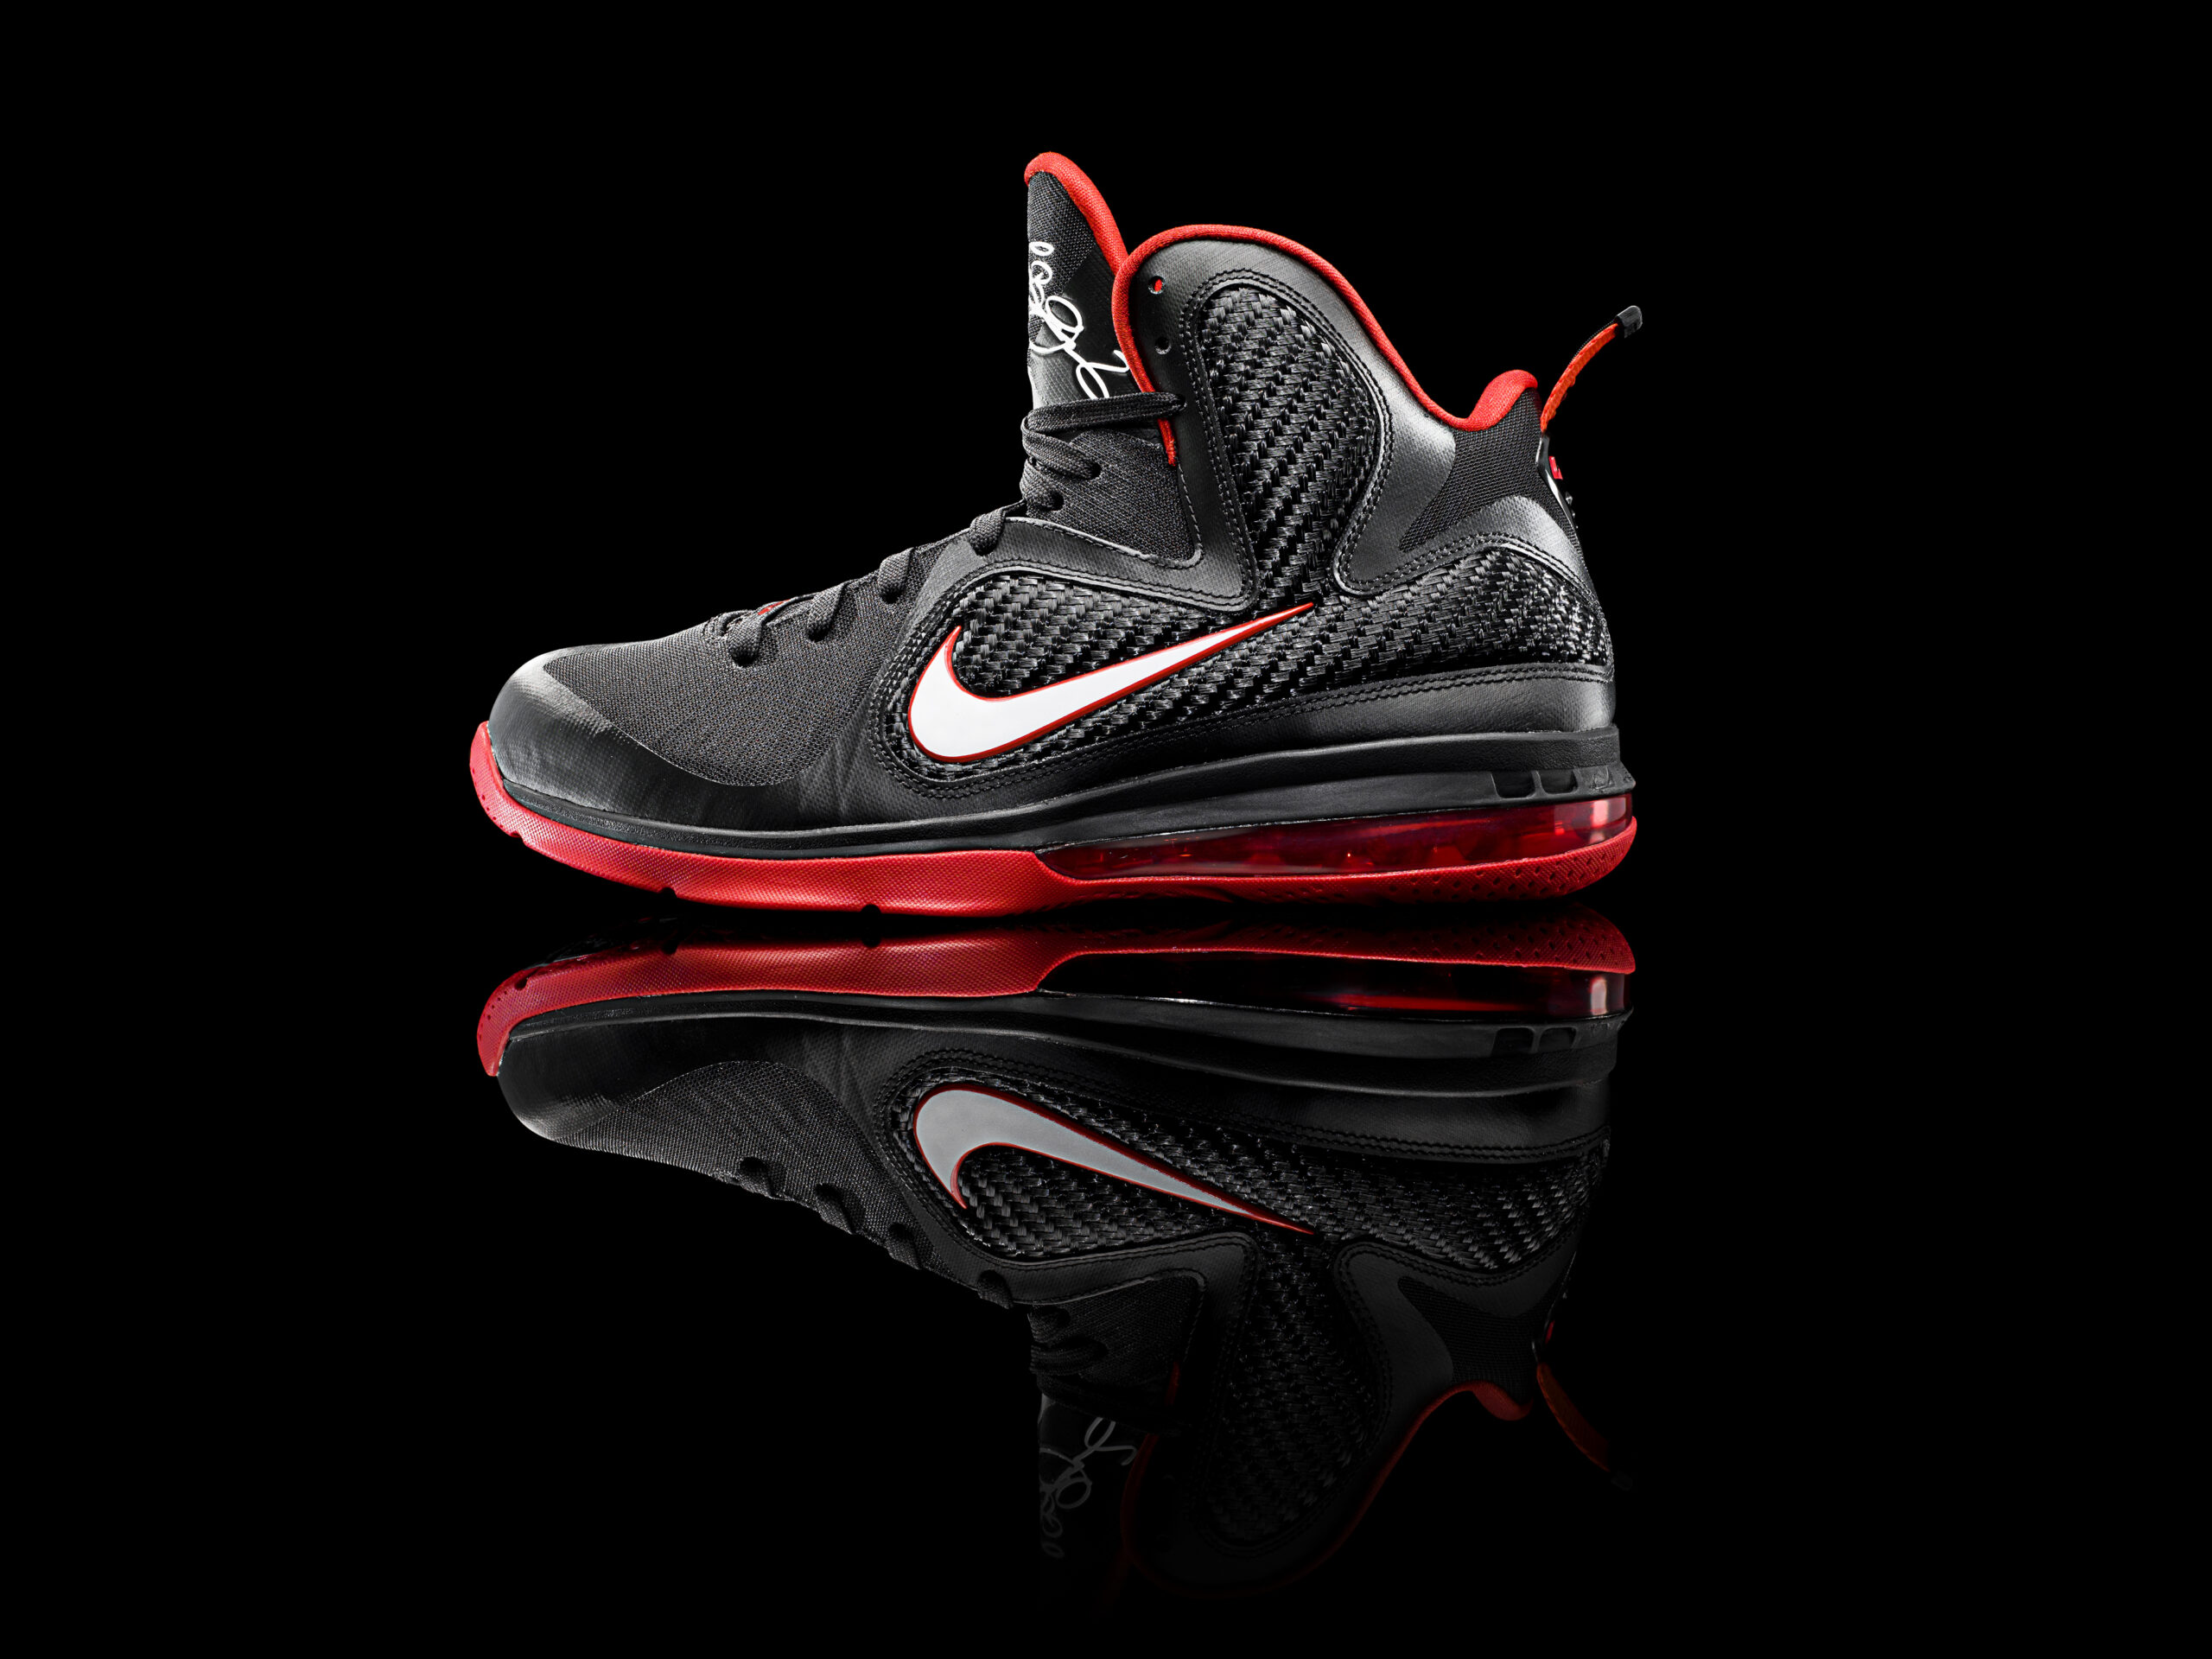 Nike LeBron 9 – Officially Unveiled